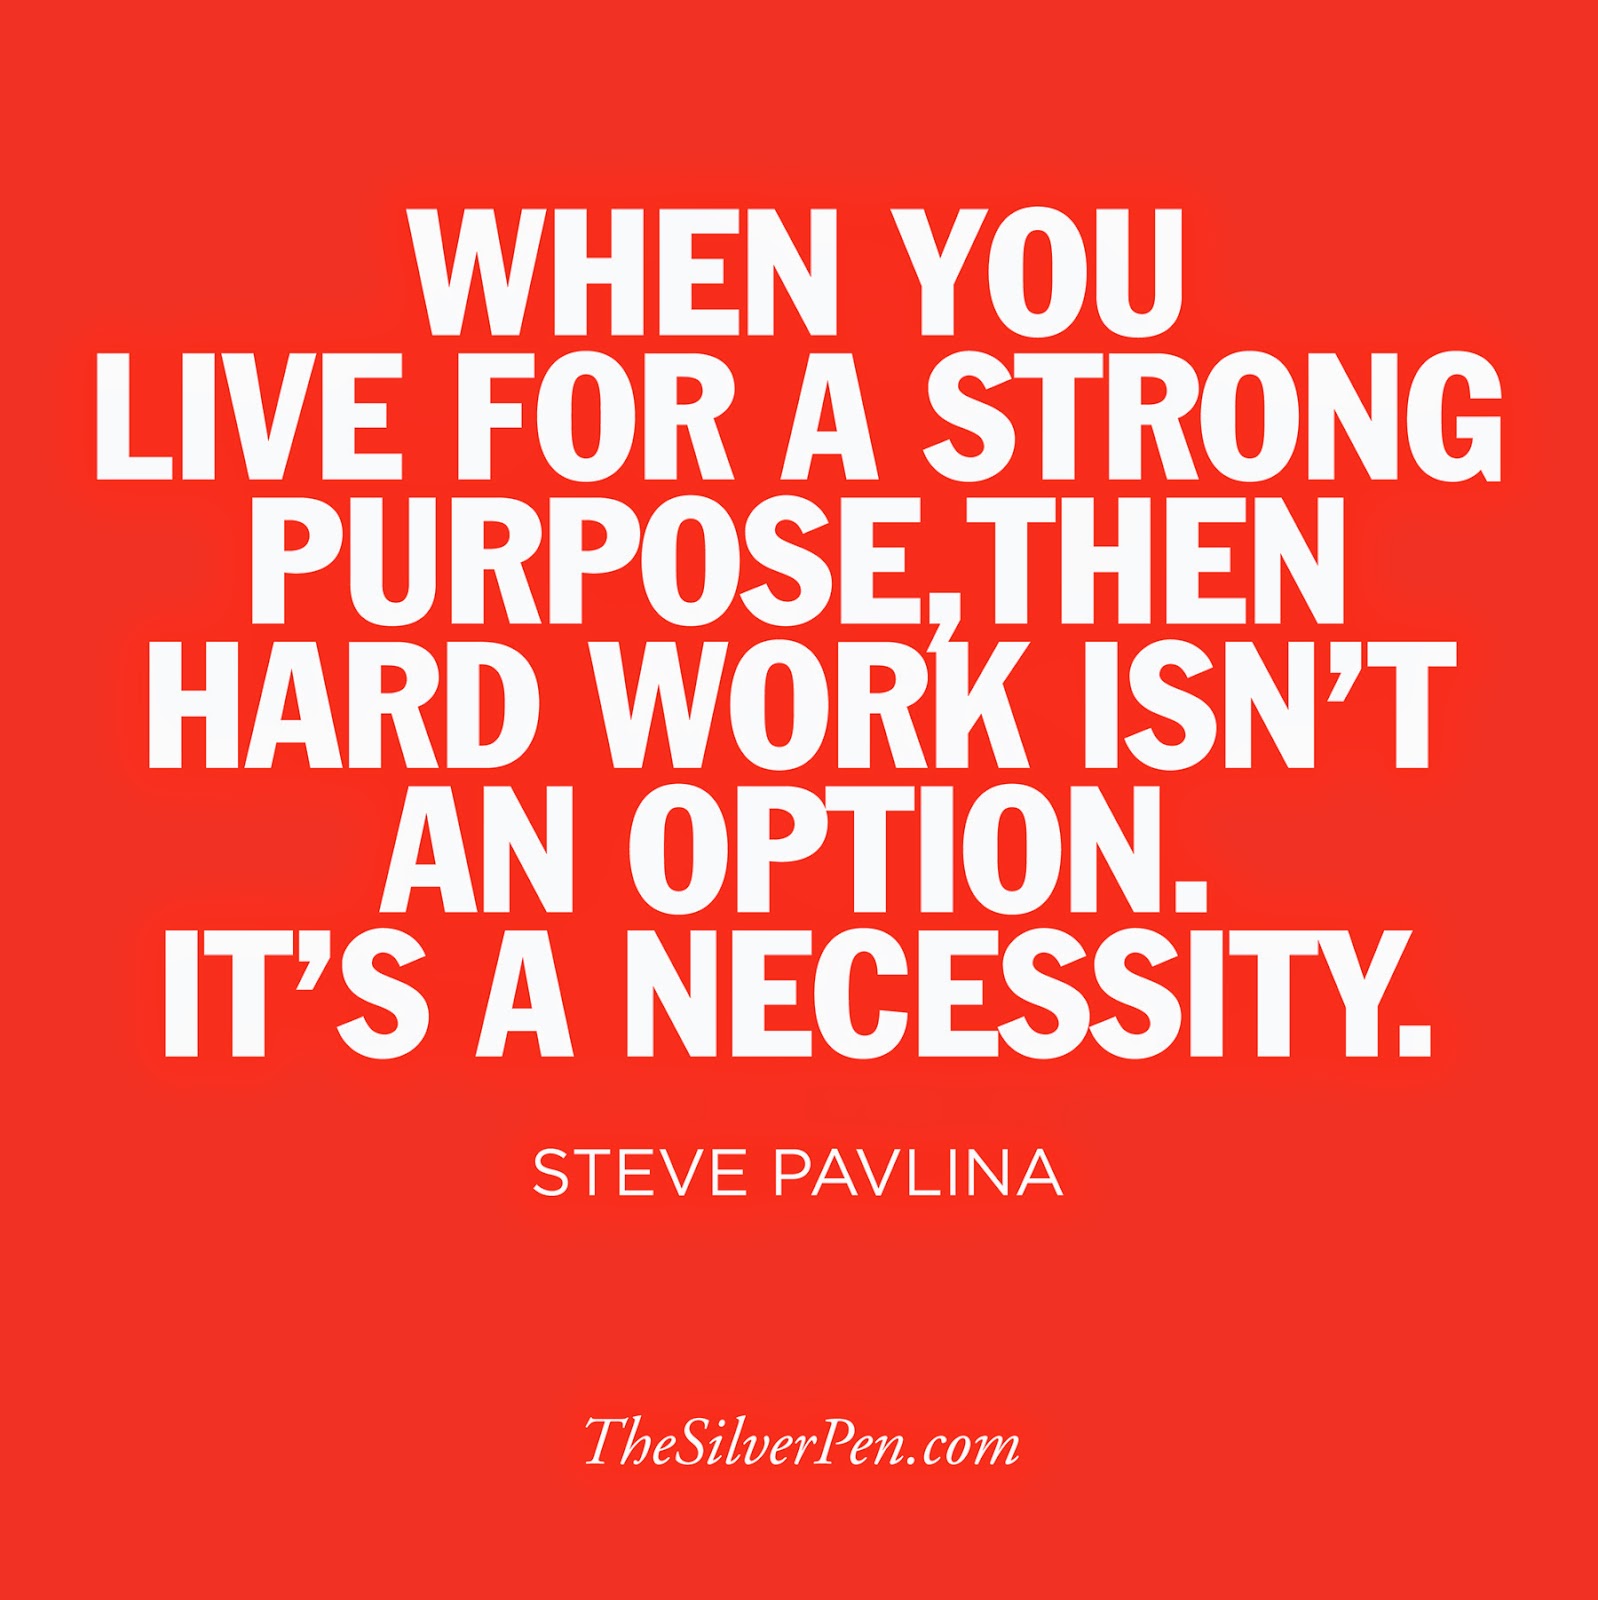 When you live for a strong purpose, then hard work isn't an option. It's a necessity. Steve Pavlina